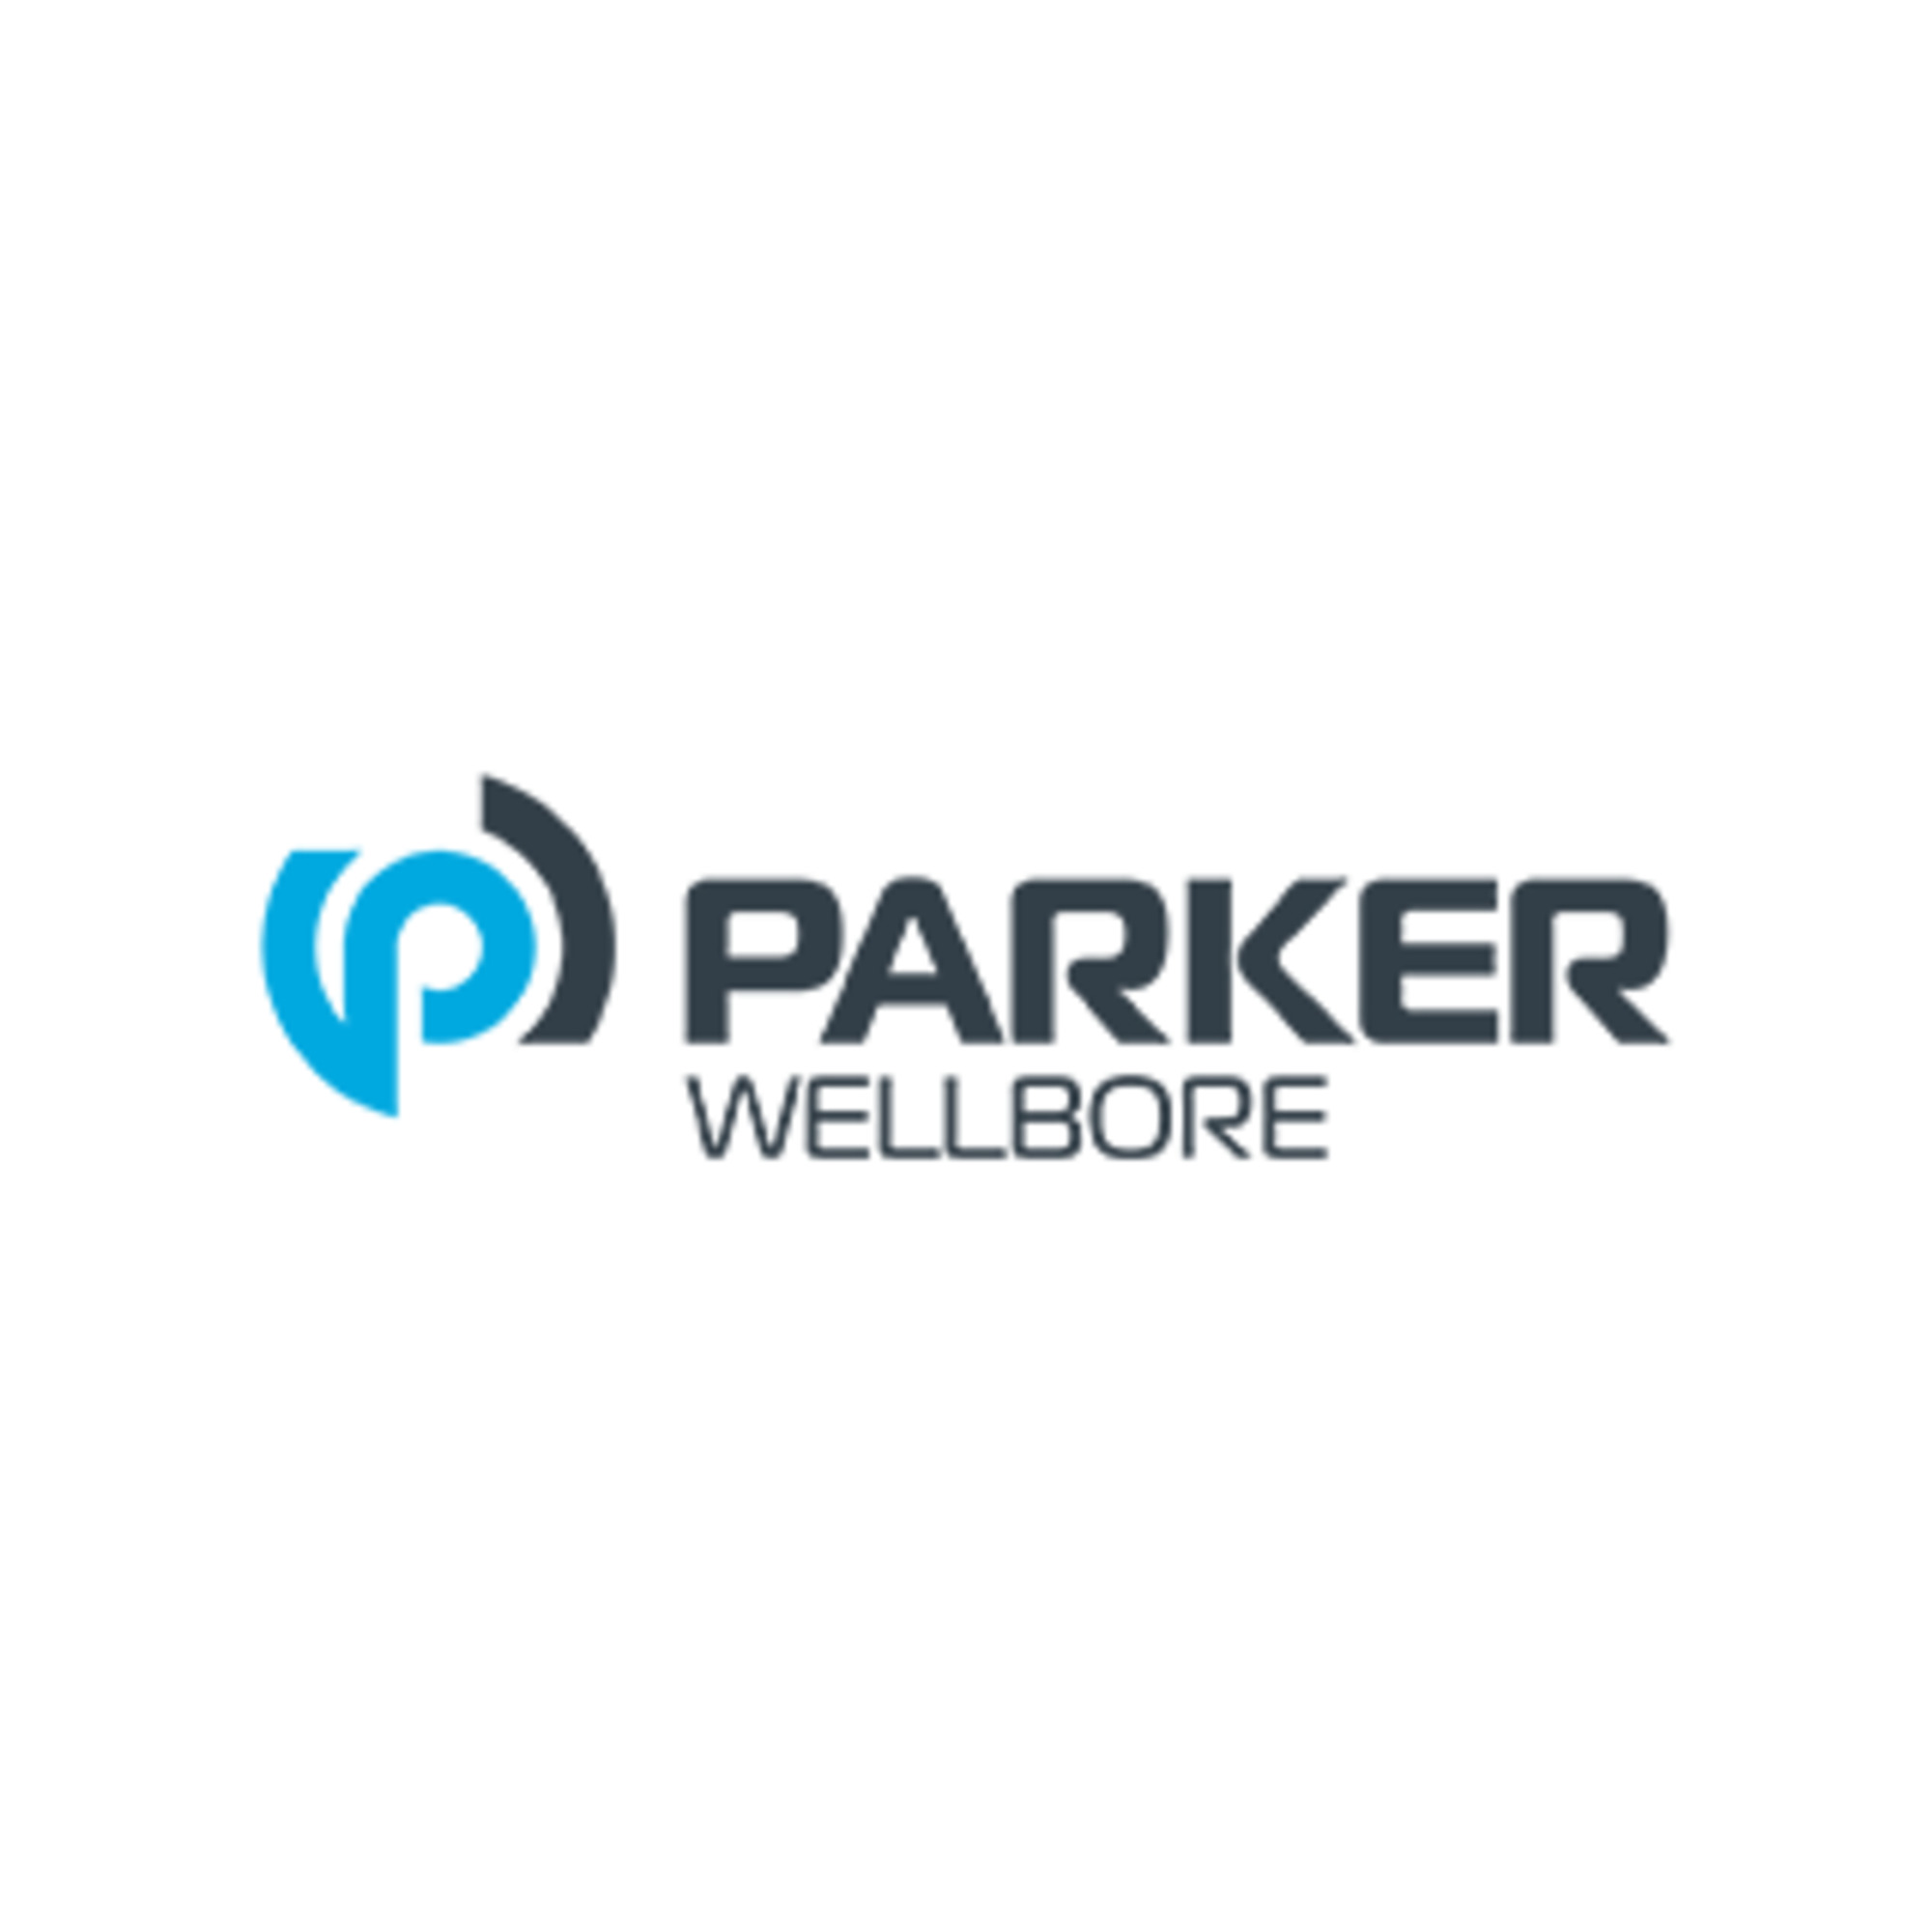 Parker Wellbore and TDE join forces to transform the drilling industry with tde powerline™